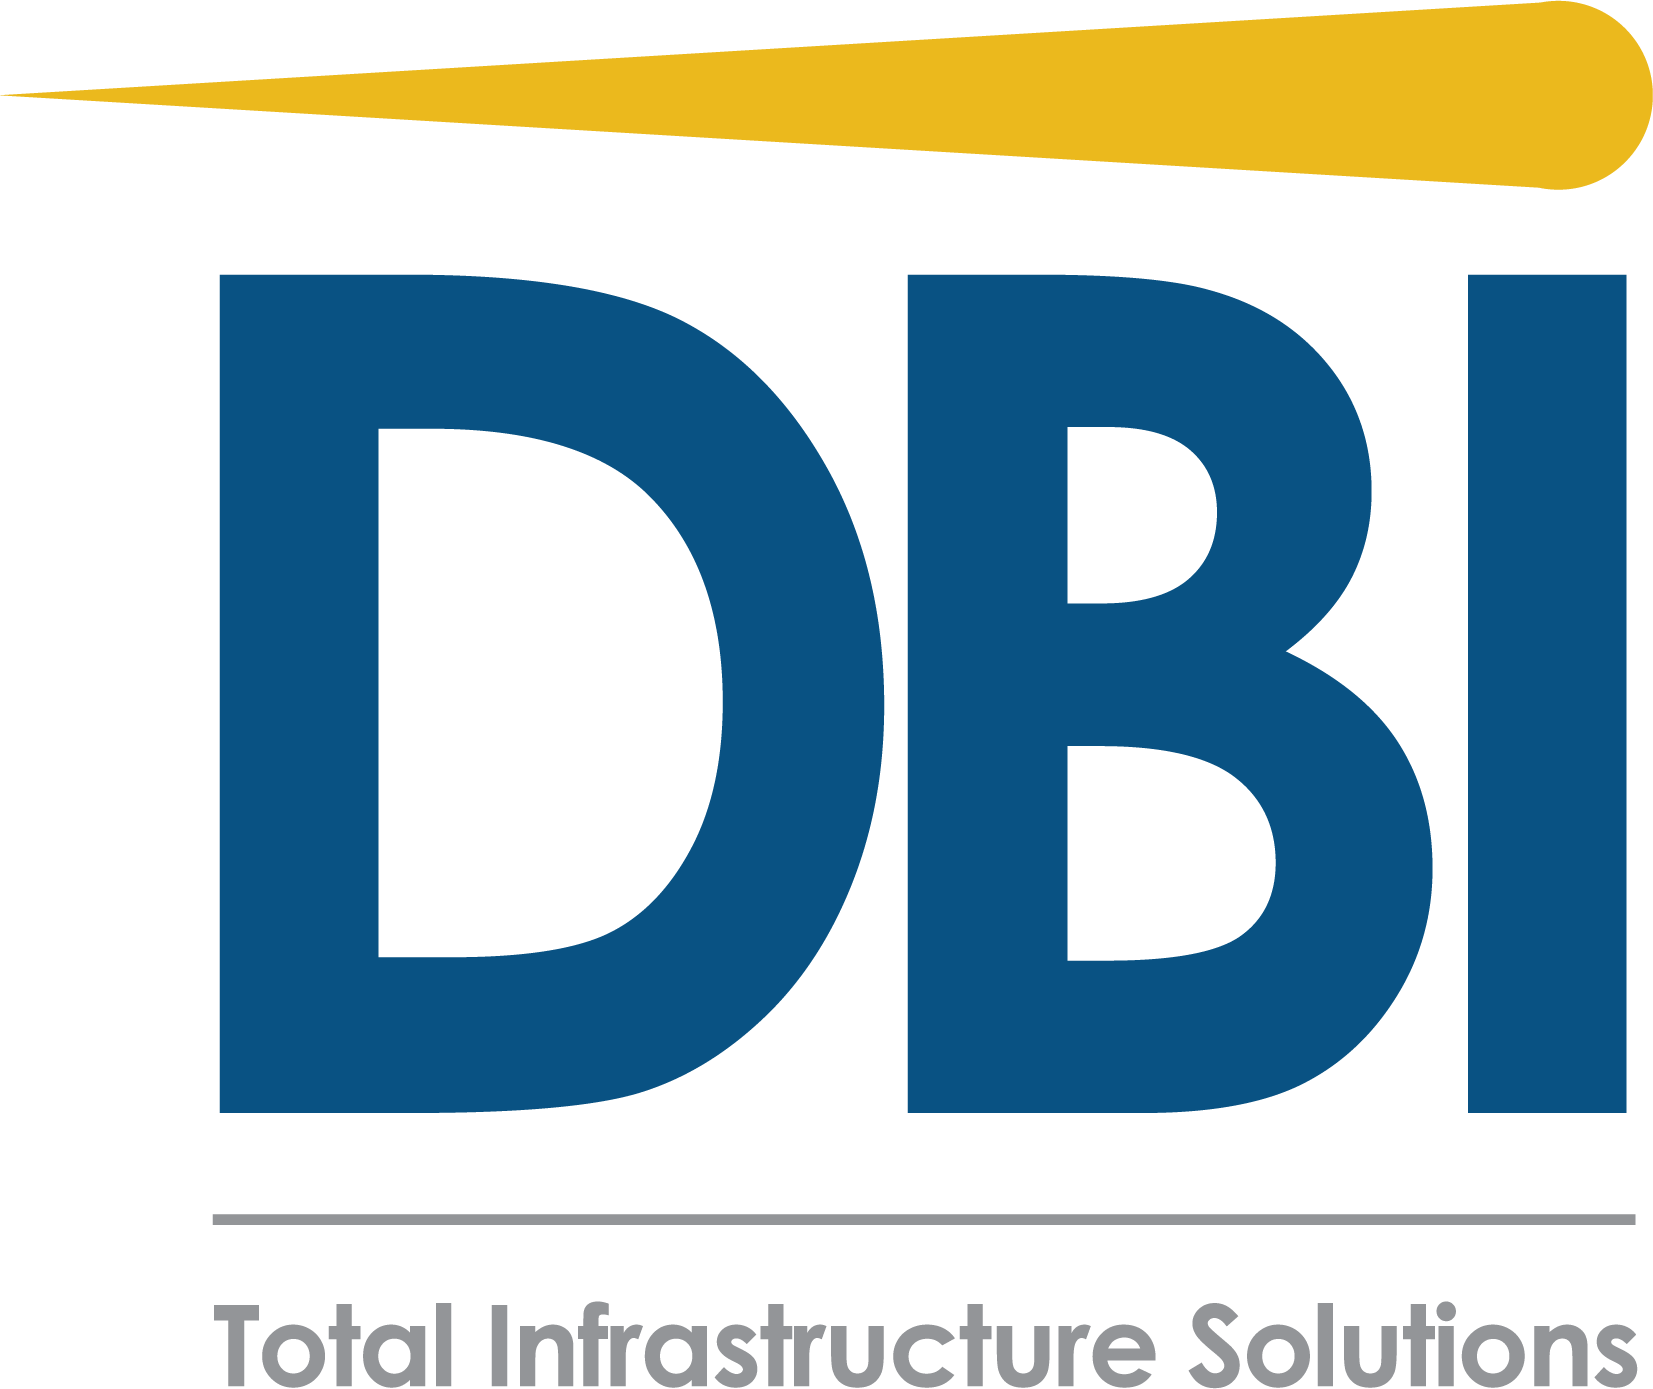 Engineer clipart geotechnical engineering. Home dbi consulting